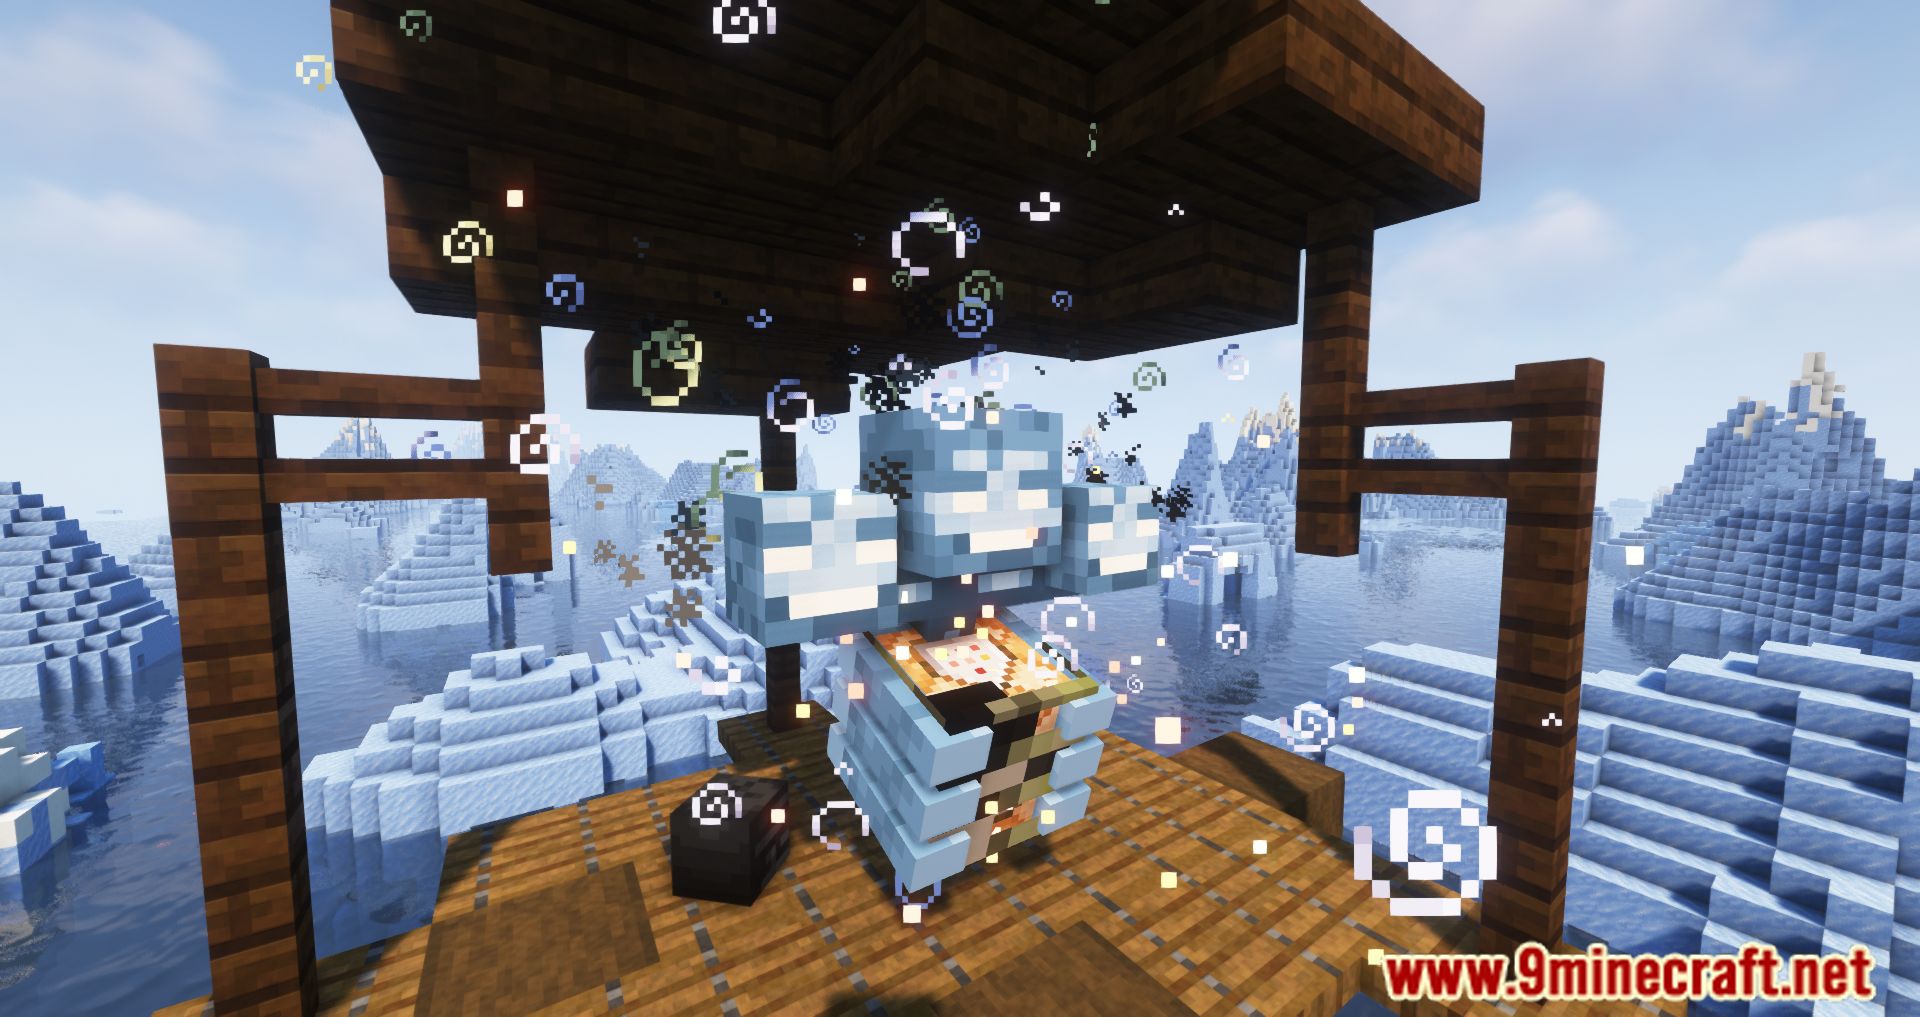 glitchy wither storm beam · Issue #1268 · nonamecrackers2/crackers